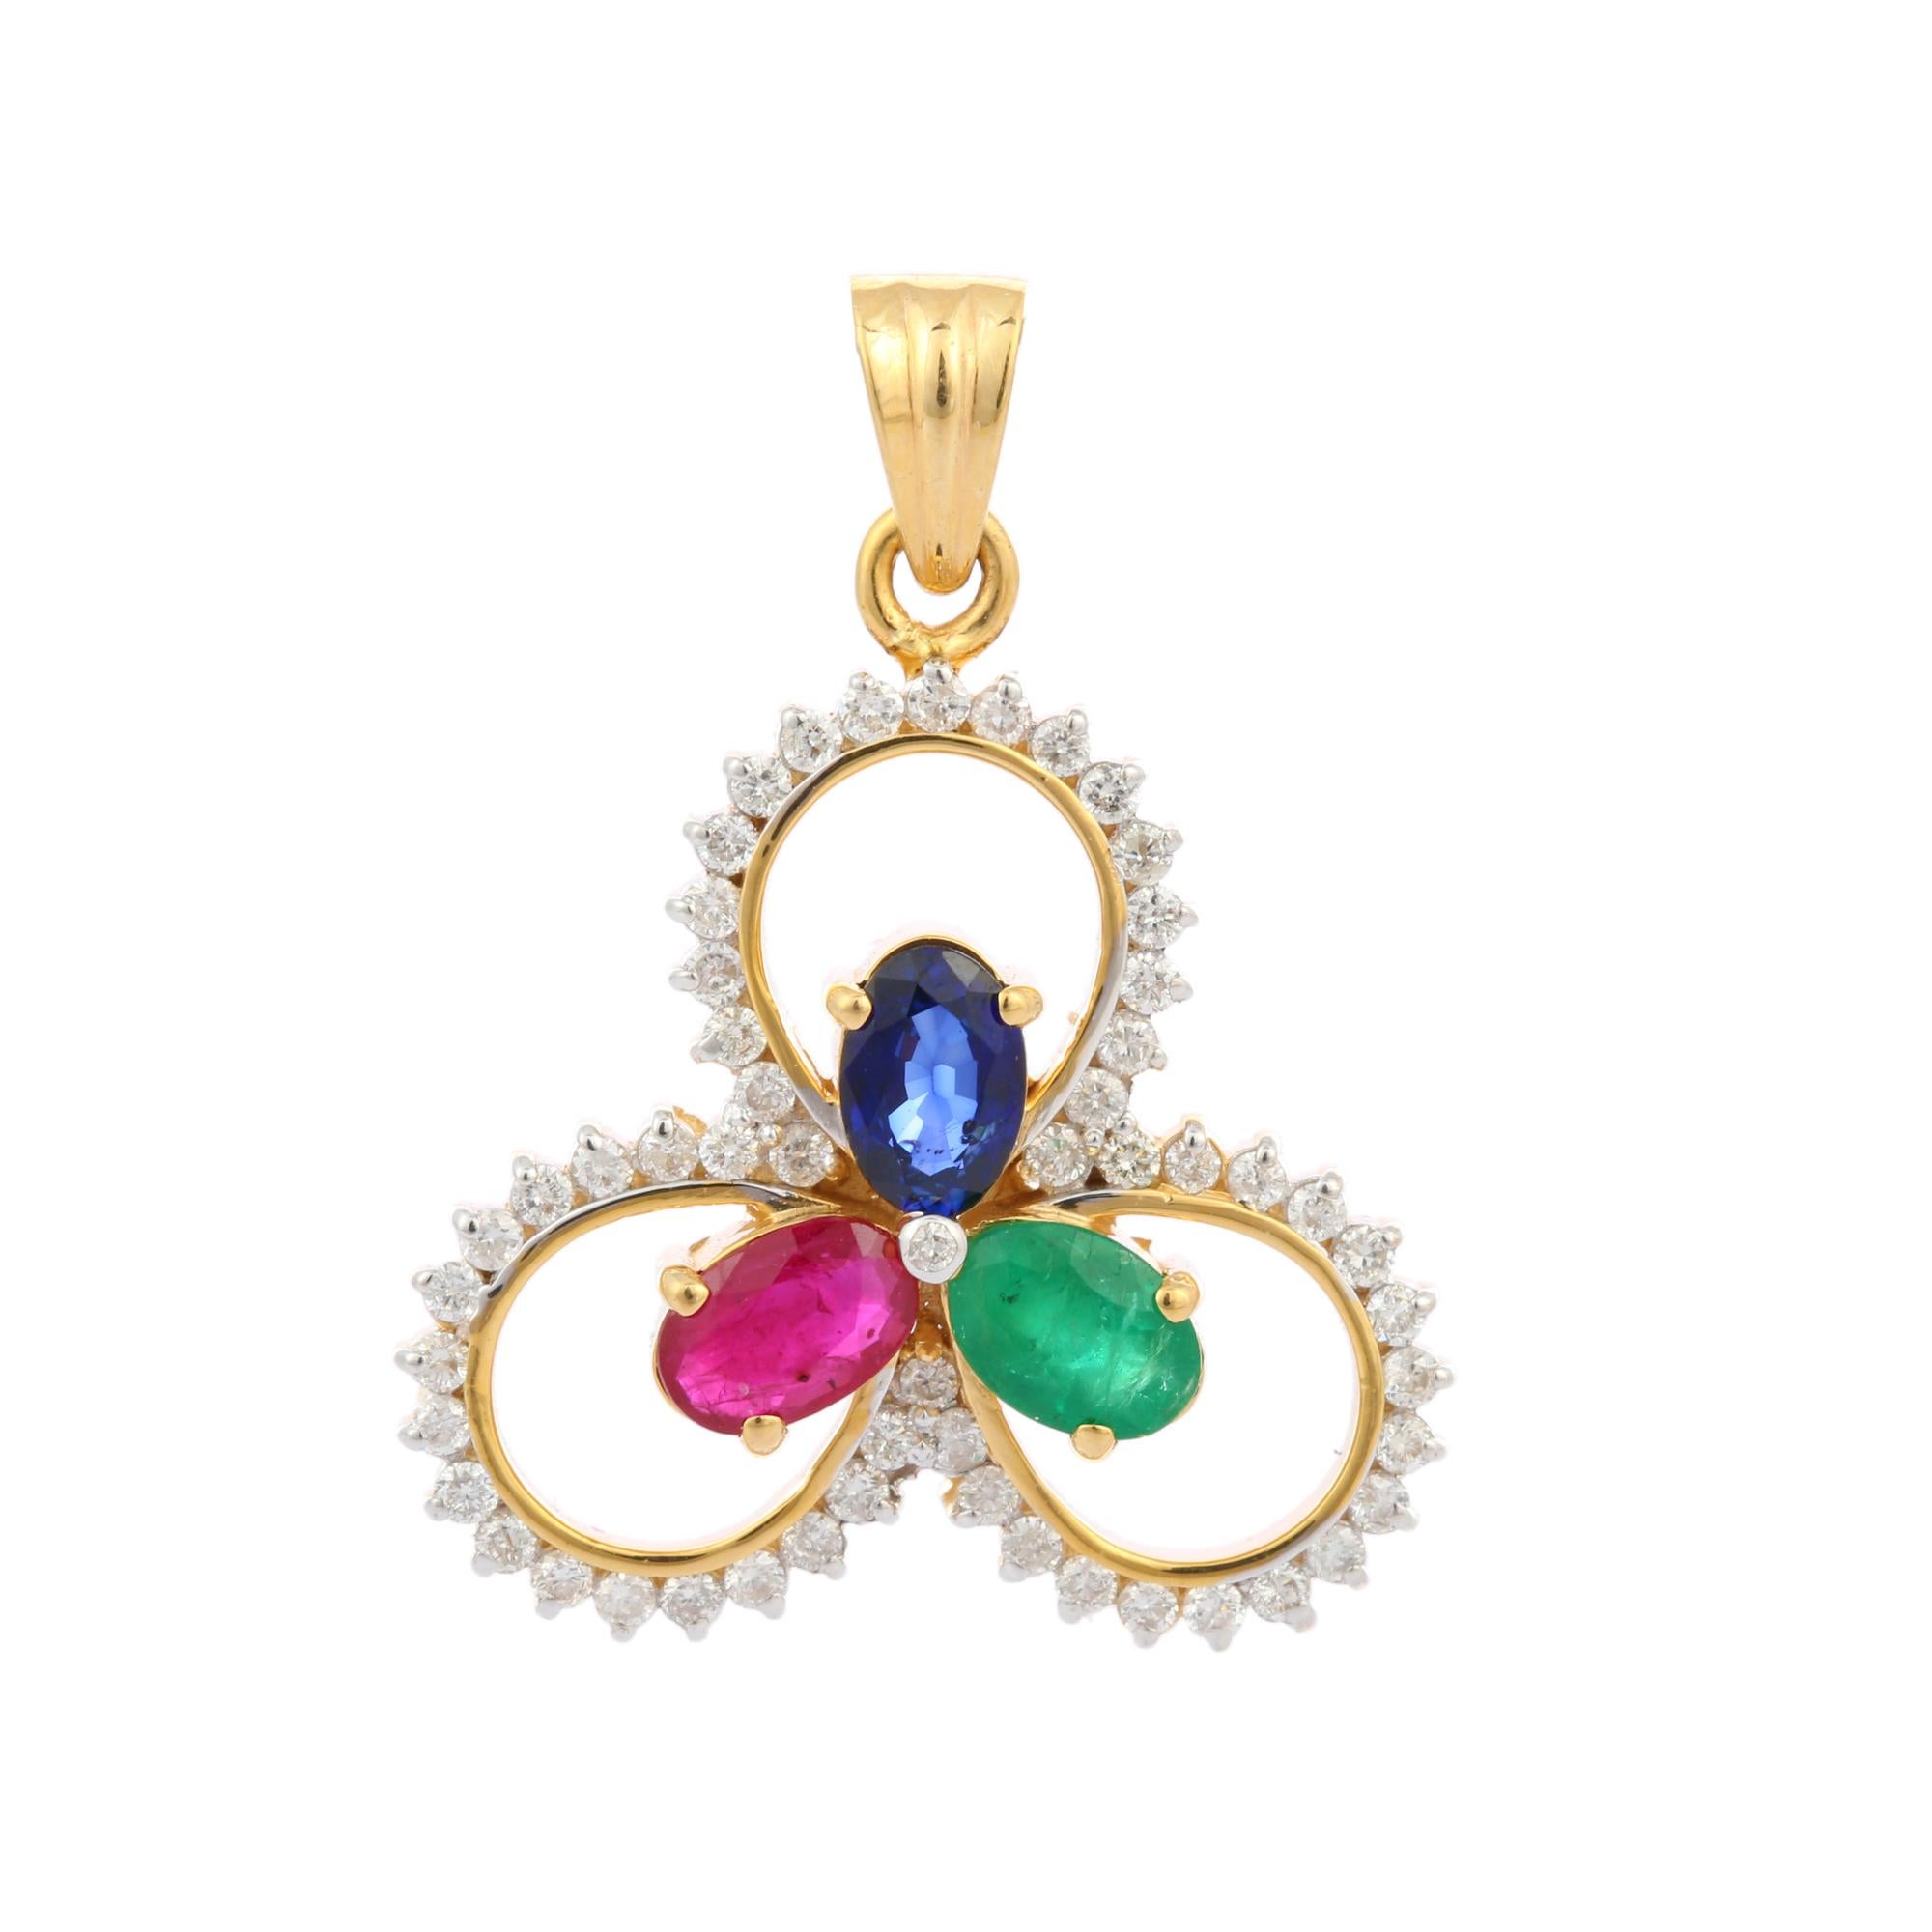 Multi Color Emerald, Ruby and Sapphire Petal Pendant with Diamond in 14K Gold. It has a oval cut gemstone studded with diamonds that completes your look with a decent touch. Pendants are used to wear or gifted to represent love and promises. It's an